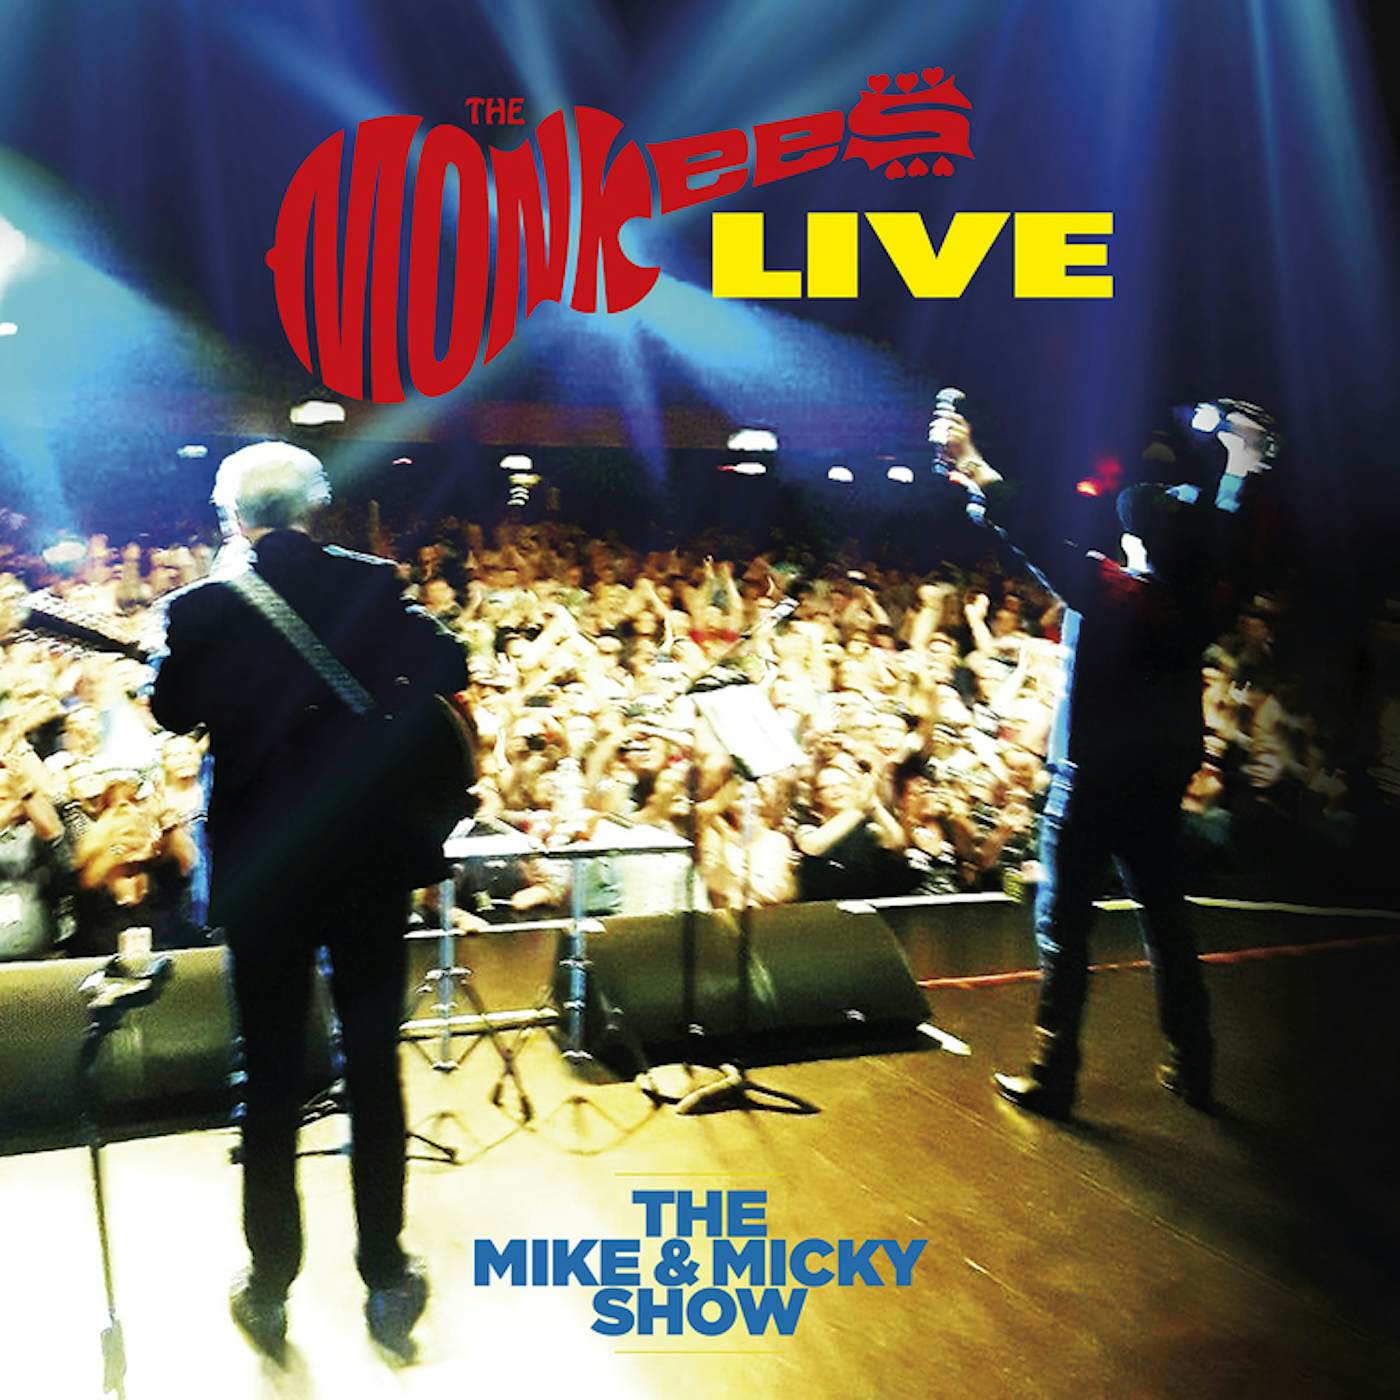 The Monkees MIKE & MICKY SHOW LIVE Vinyl Record